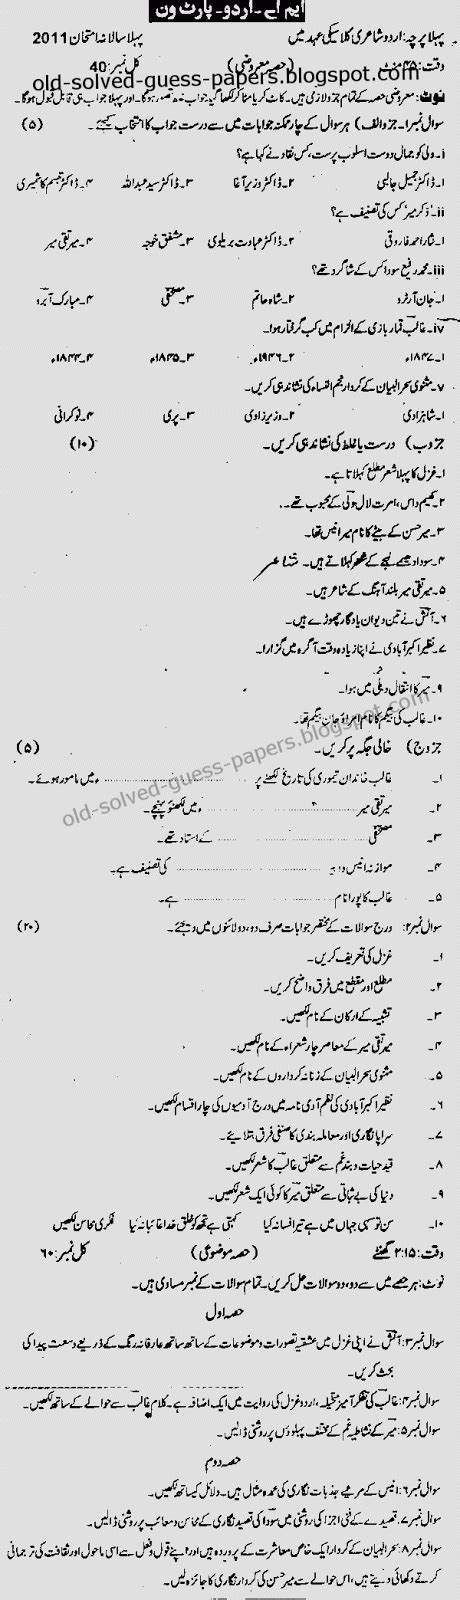 Classic Urdu Poetry Paper I Part I Old Solved And Guess Papers